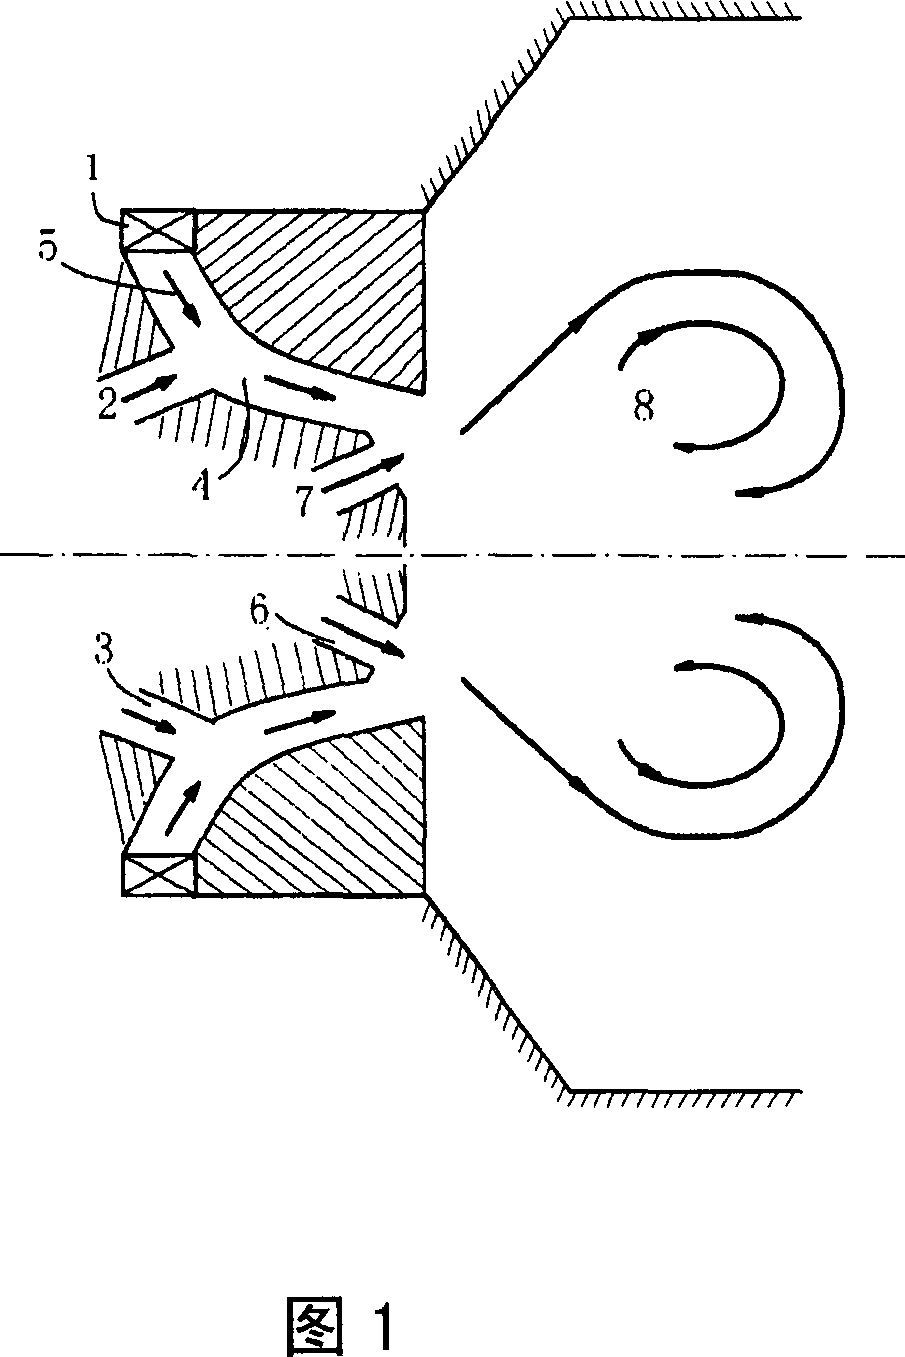 Nozzle structure of combustion chamber in low heat value of gas turbine, and combustion method